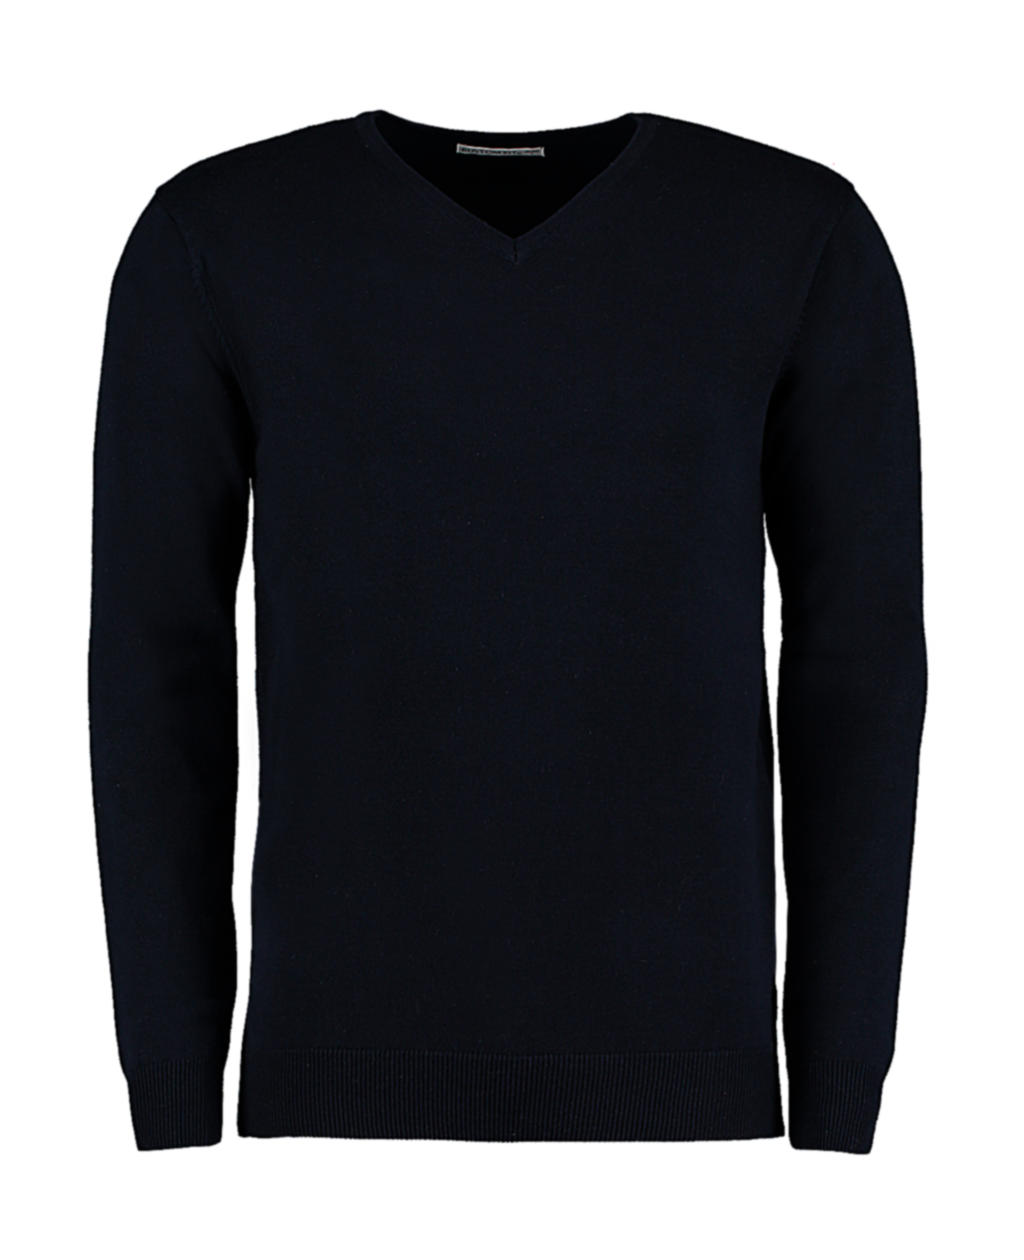  Classic Fit Arundel V Neck Sweater in Farbe Navy